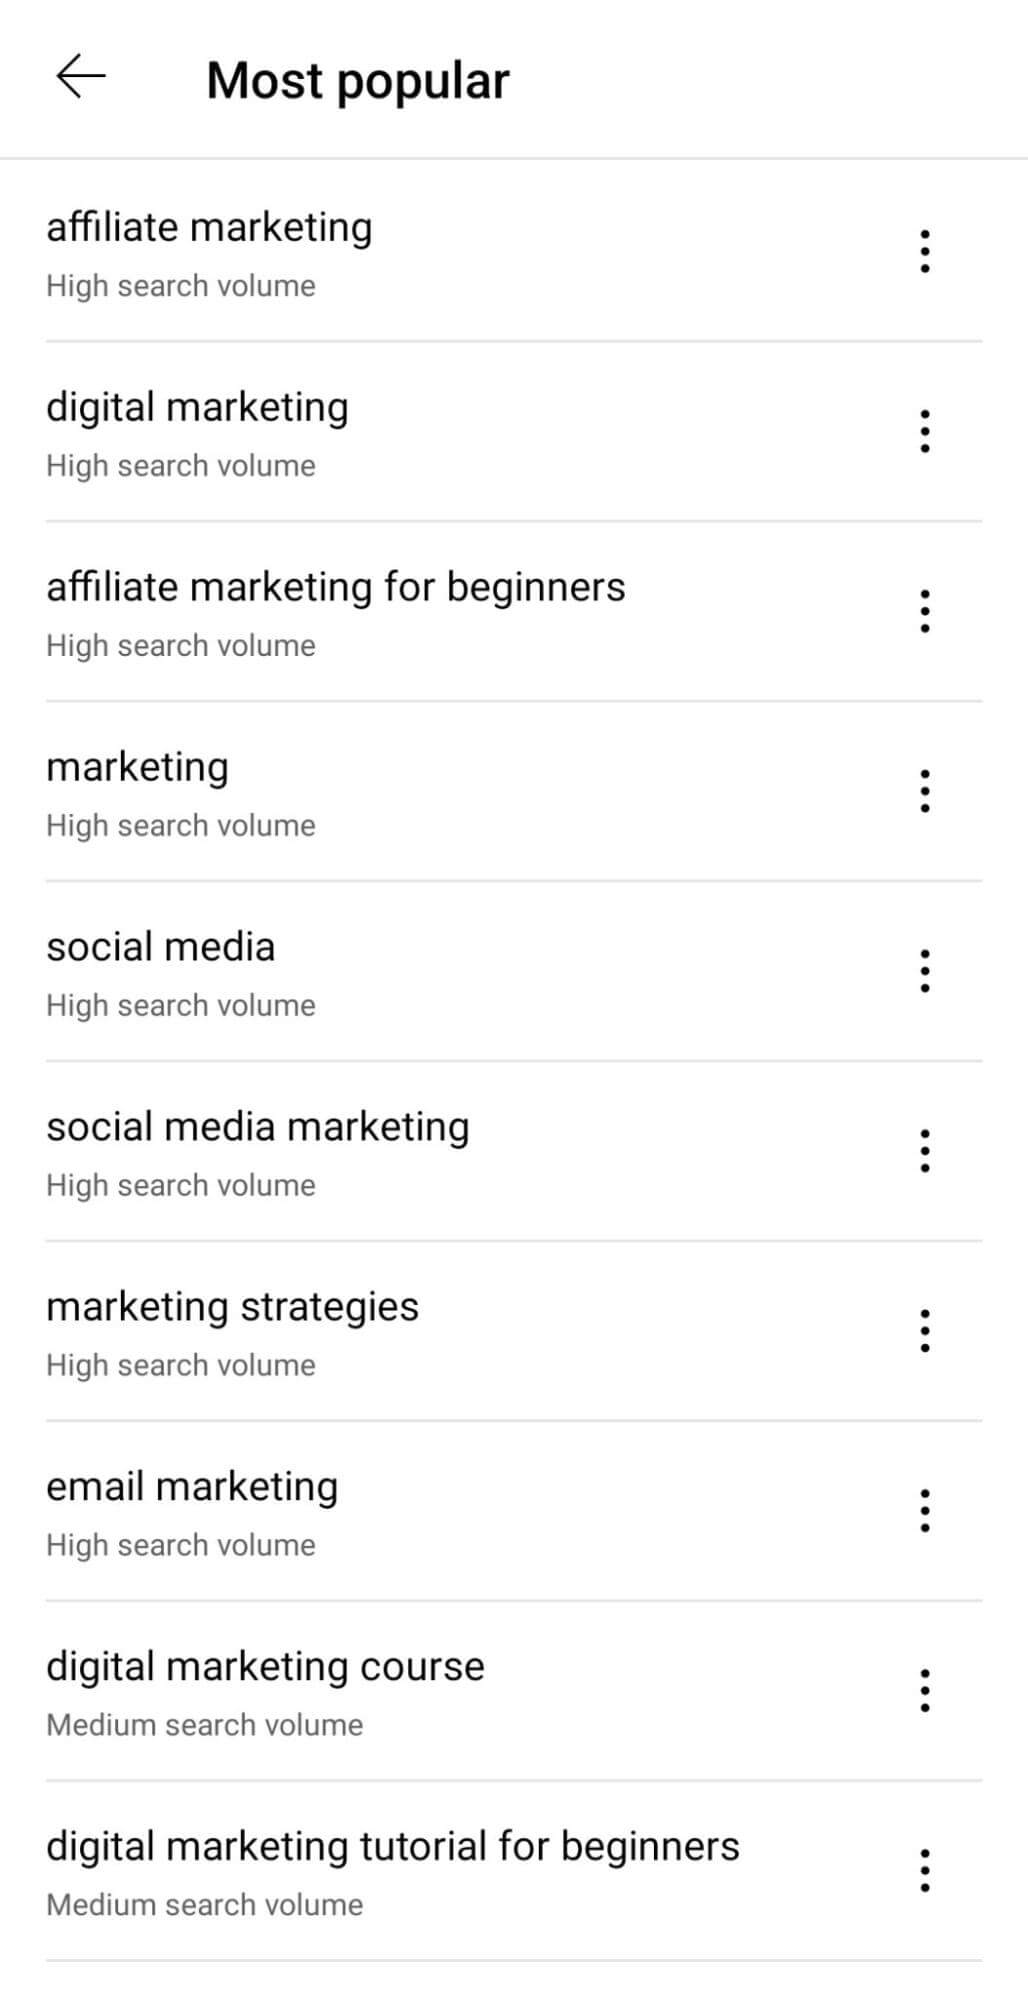 youtube-search-volume-for-potential-topics-most-popular-9